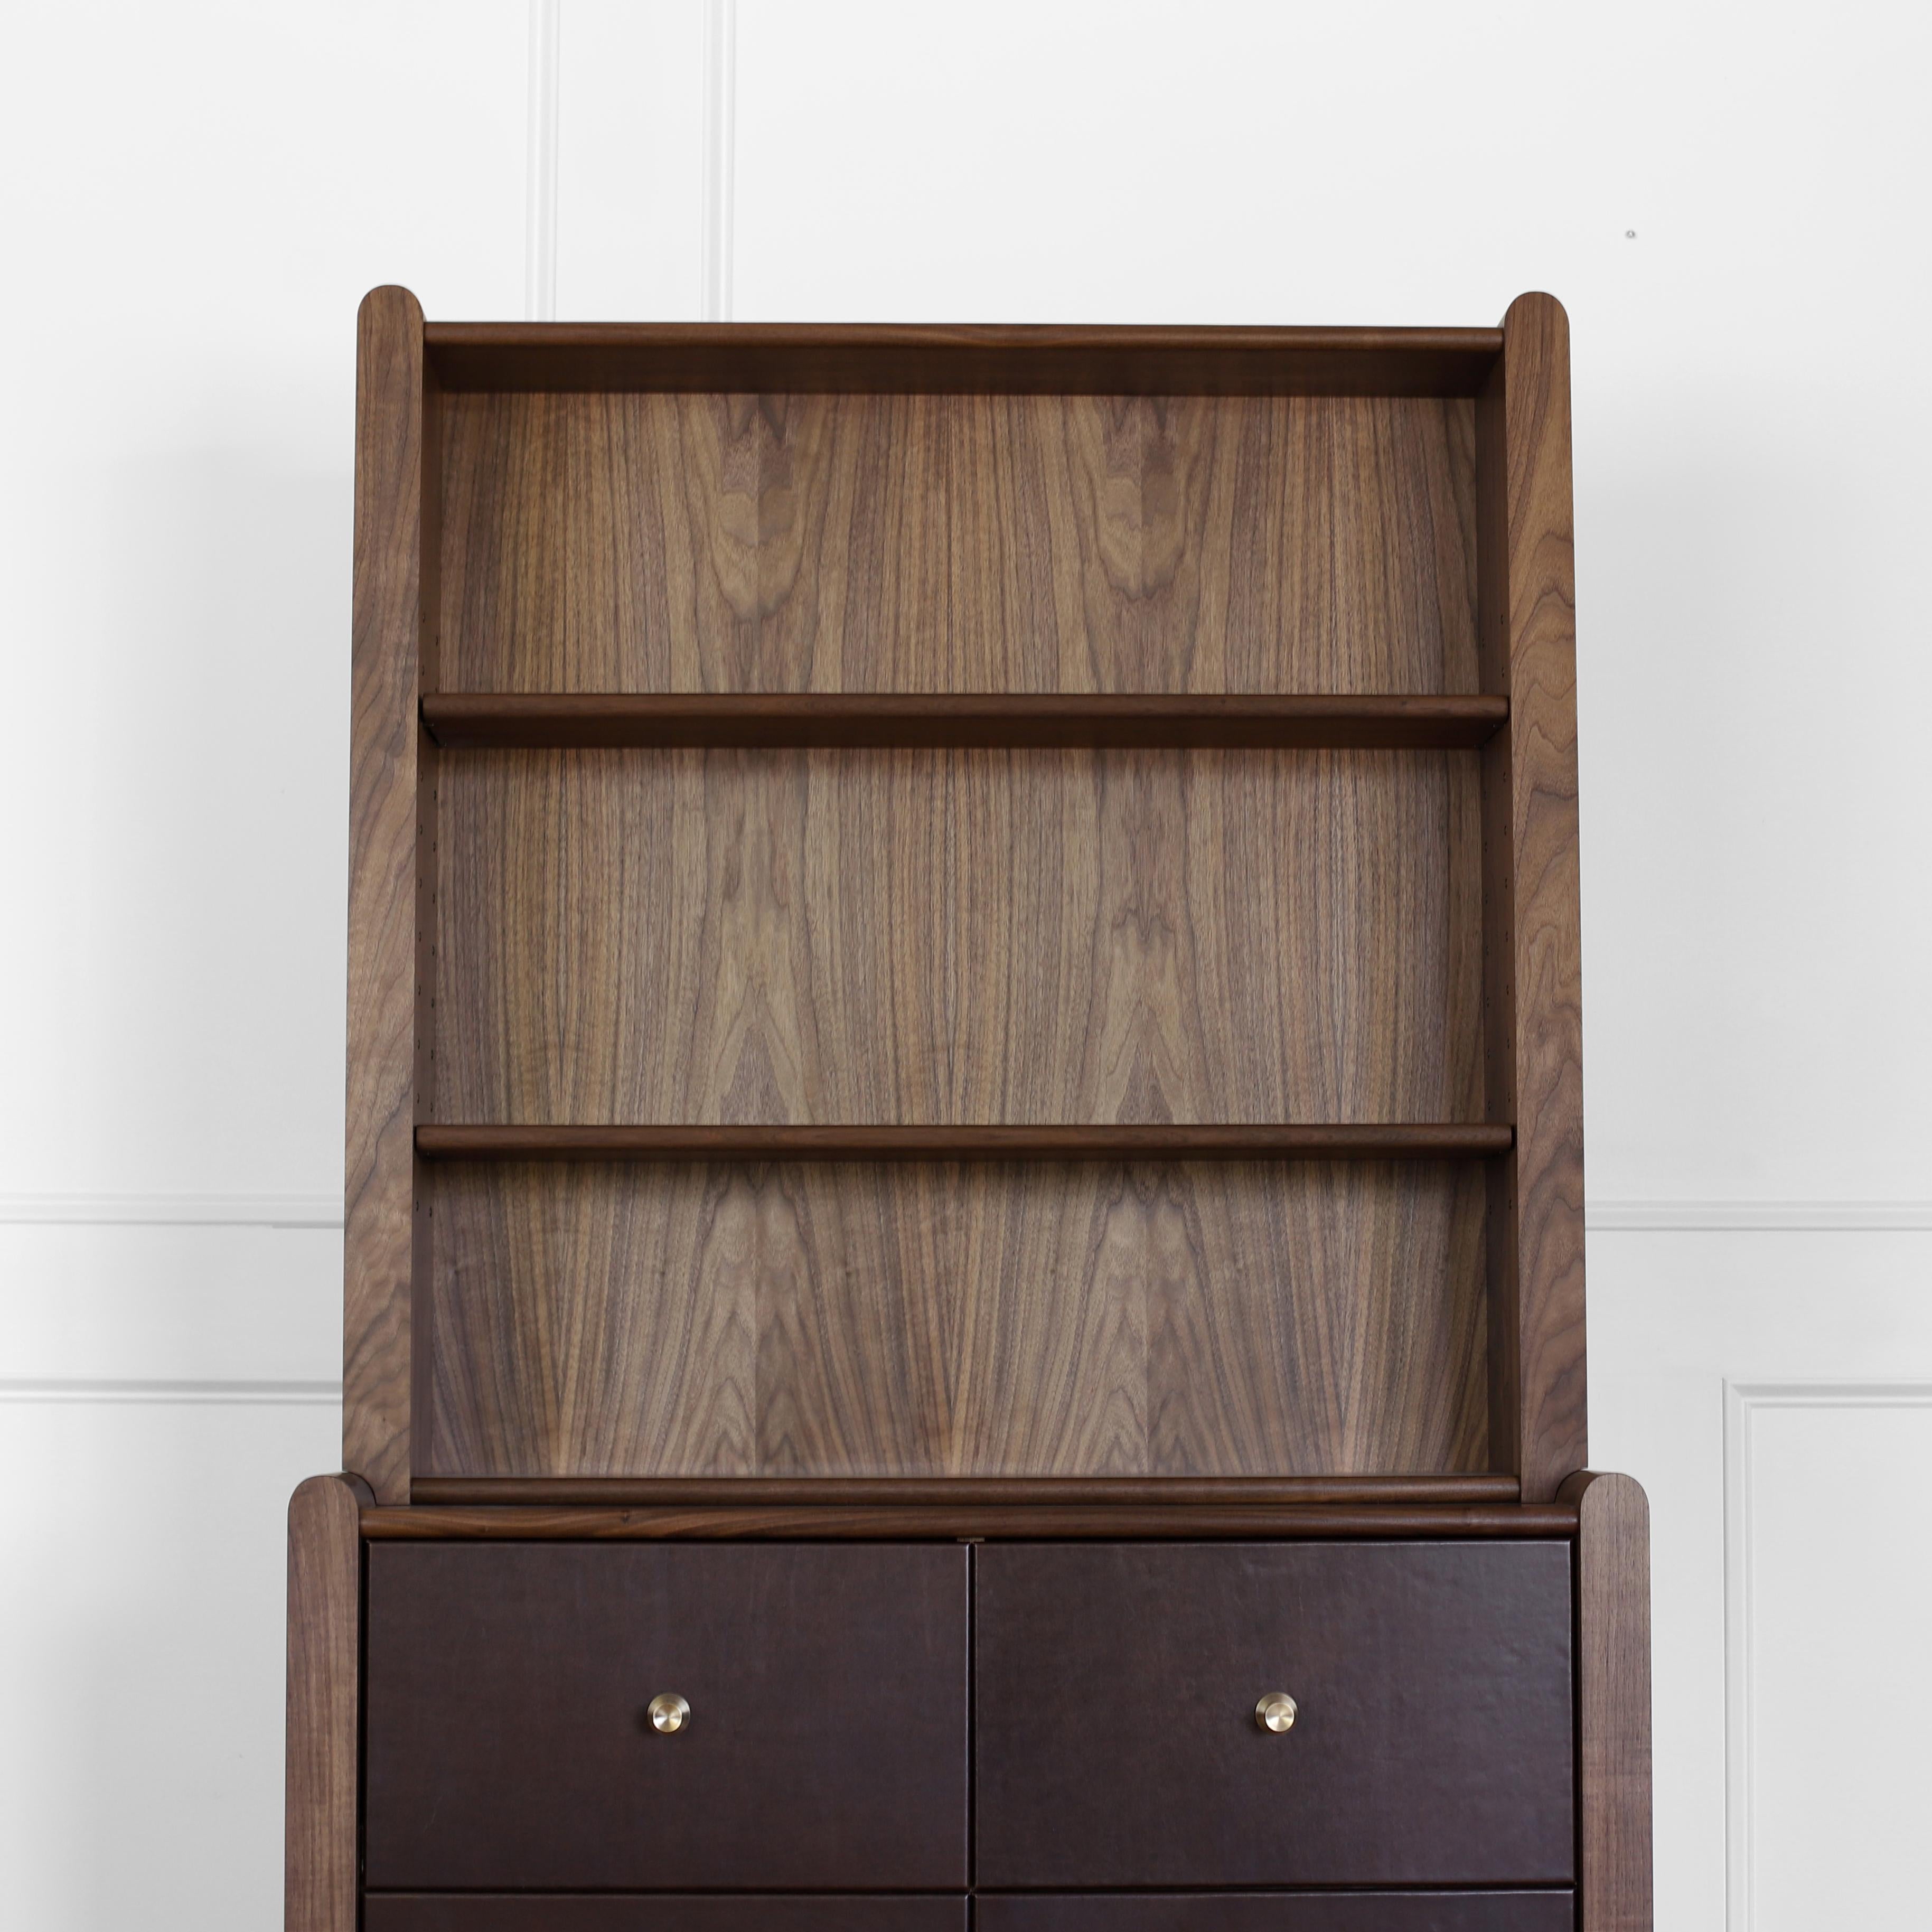 Oiled Ready to ship Alton Hutch by Crump and Kwash / Modern solid wood bookcase For Sale